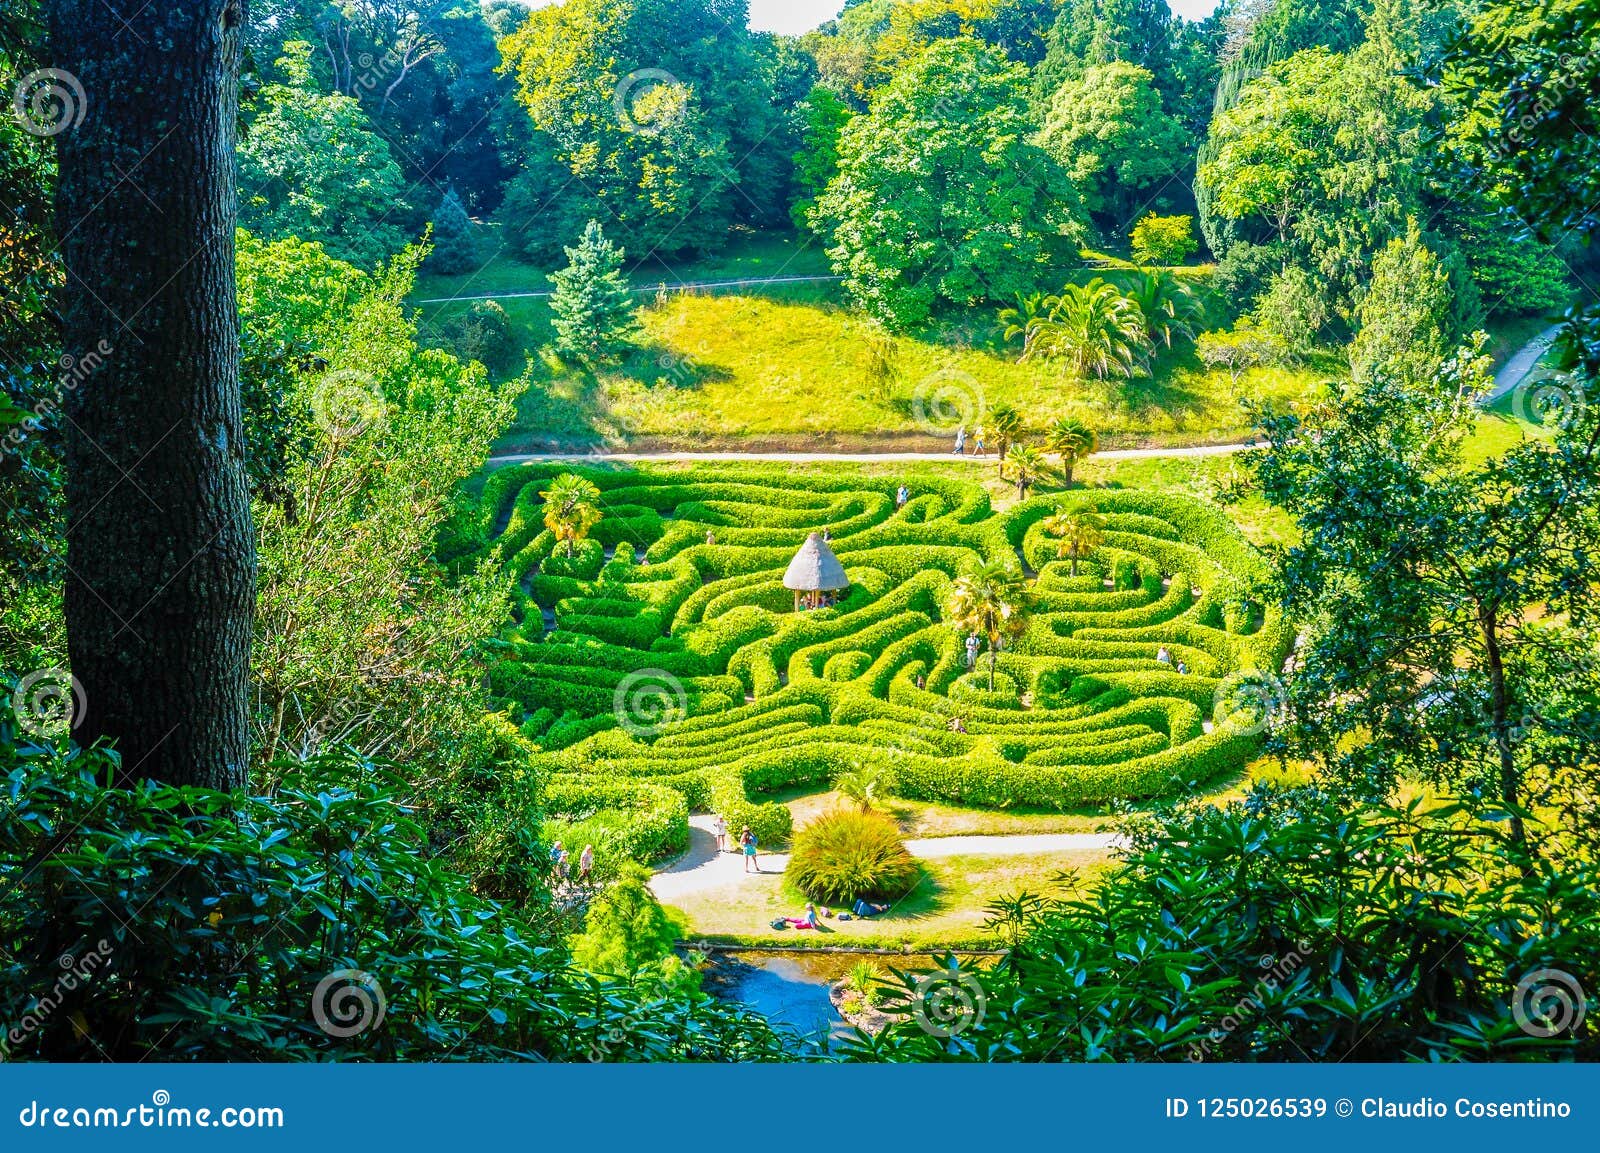 photograph of a park in the form of a labyrinth.